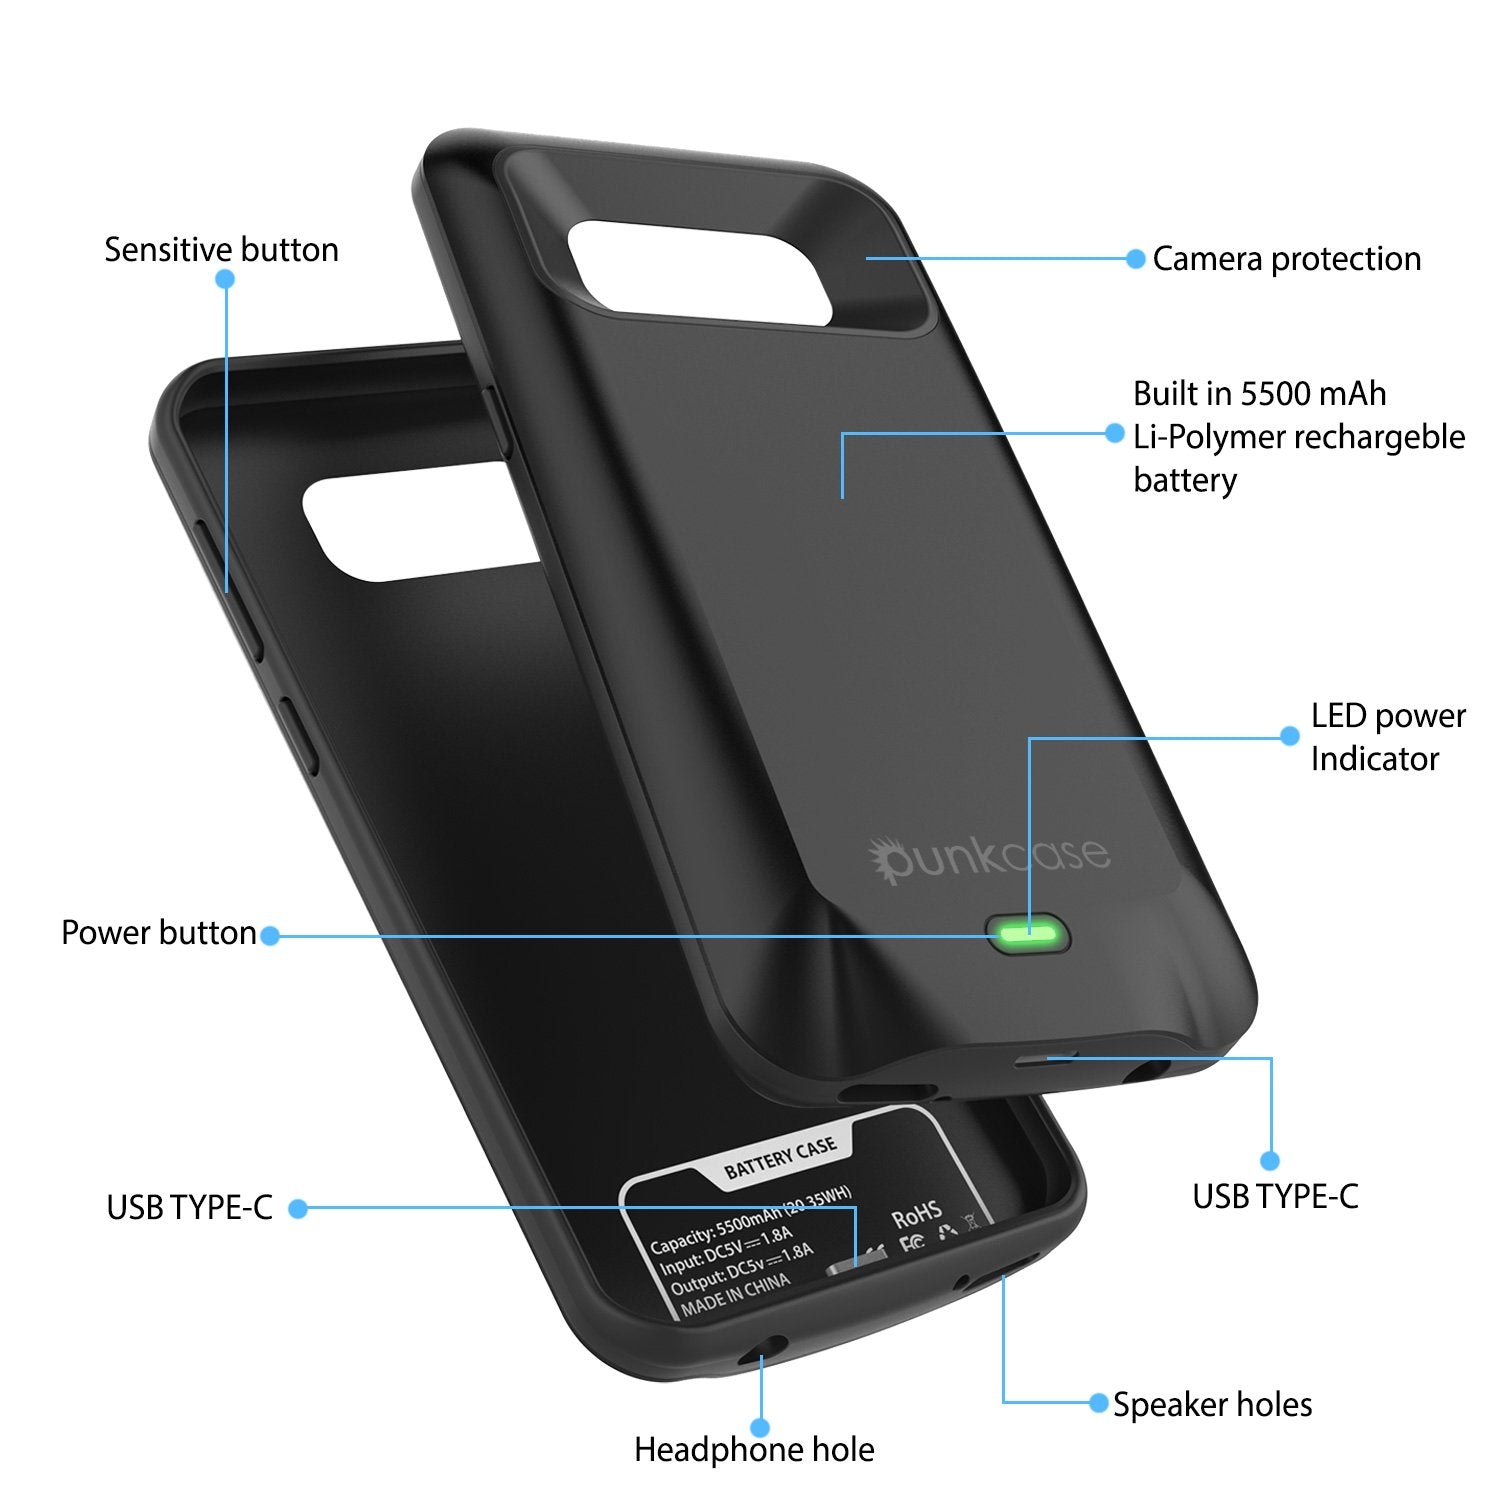 Galaxy S8 PLUS Battery Case, Punkcase 5500mAH Charger Case W/ Screen Protector | Integrated Kickstand & USB Port | IntelSwitch [Black]